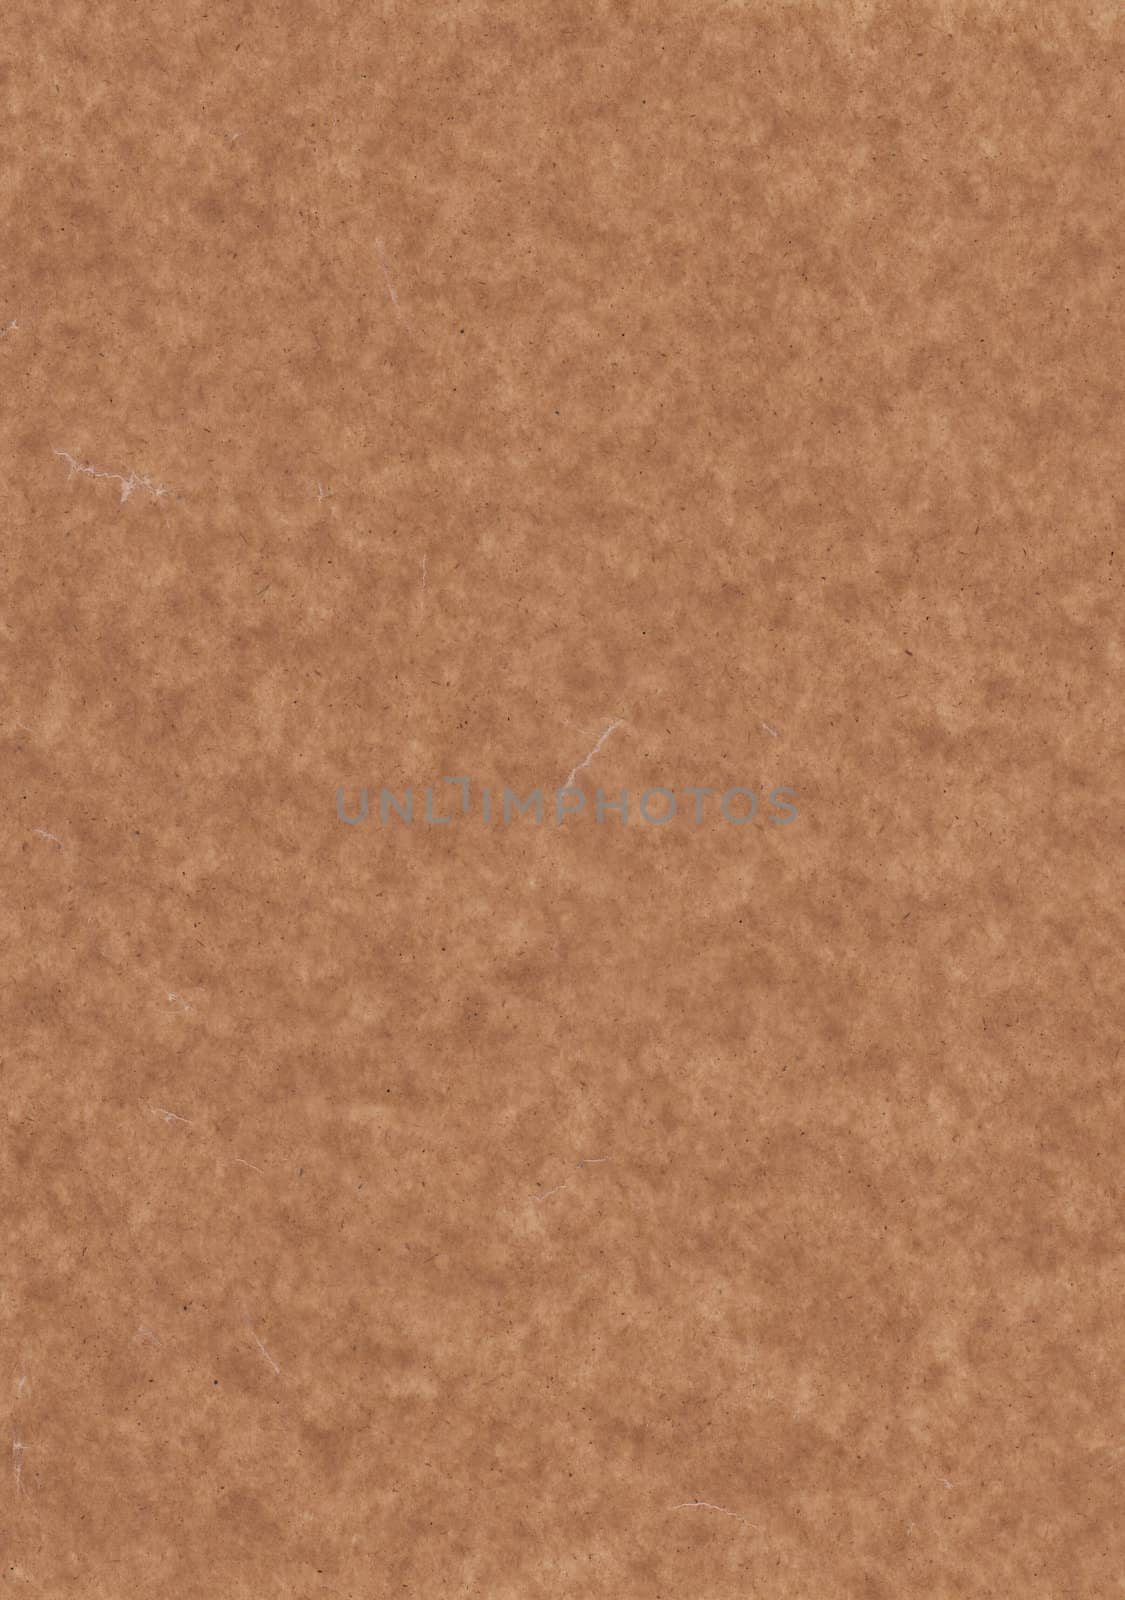 A high resolution image of brown parchment paper.